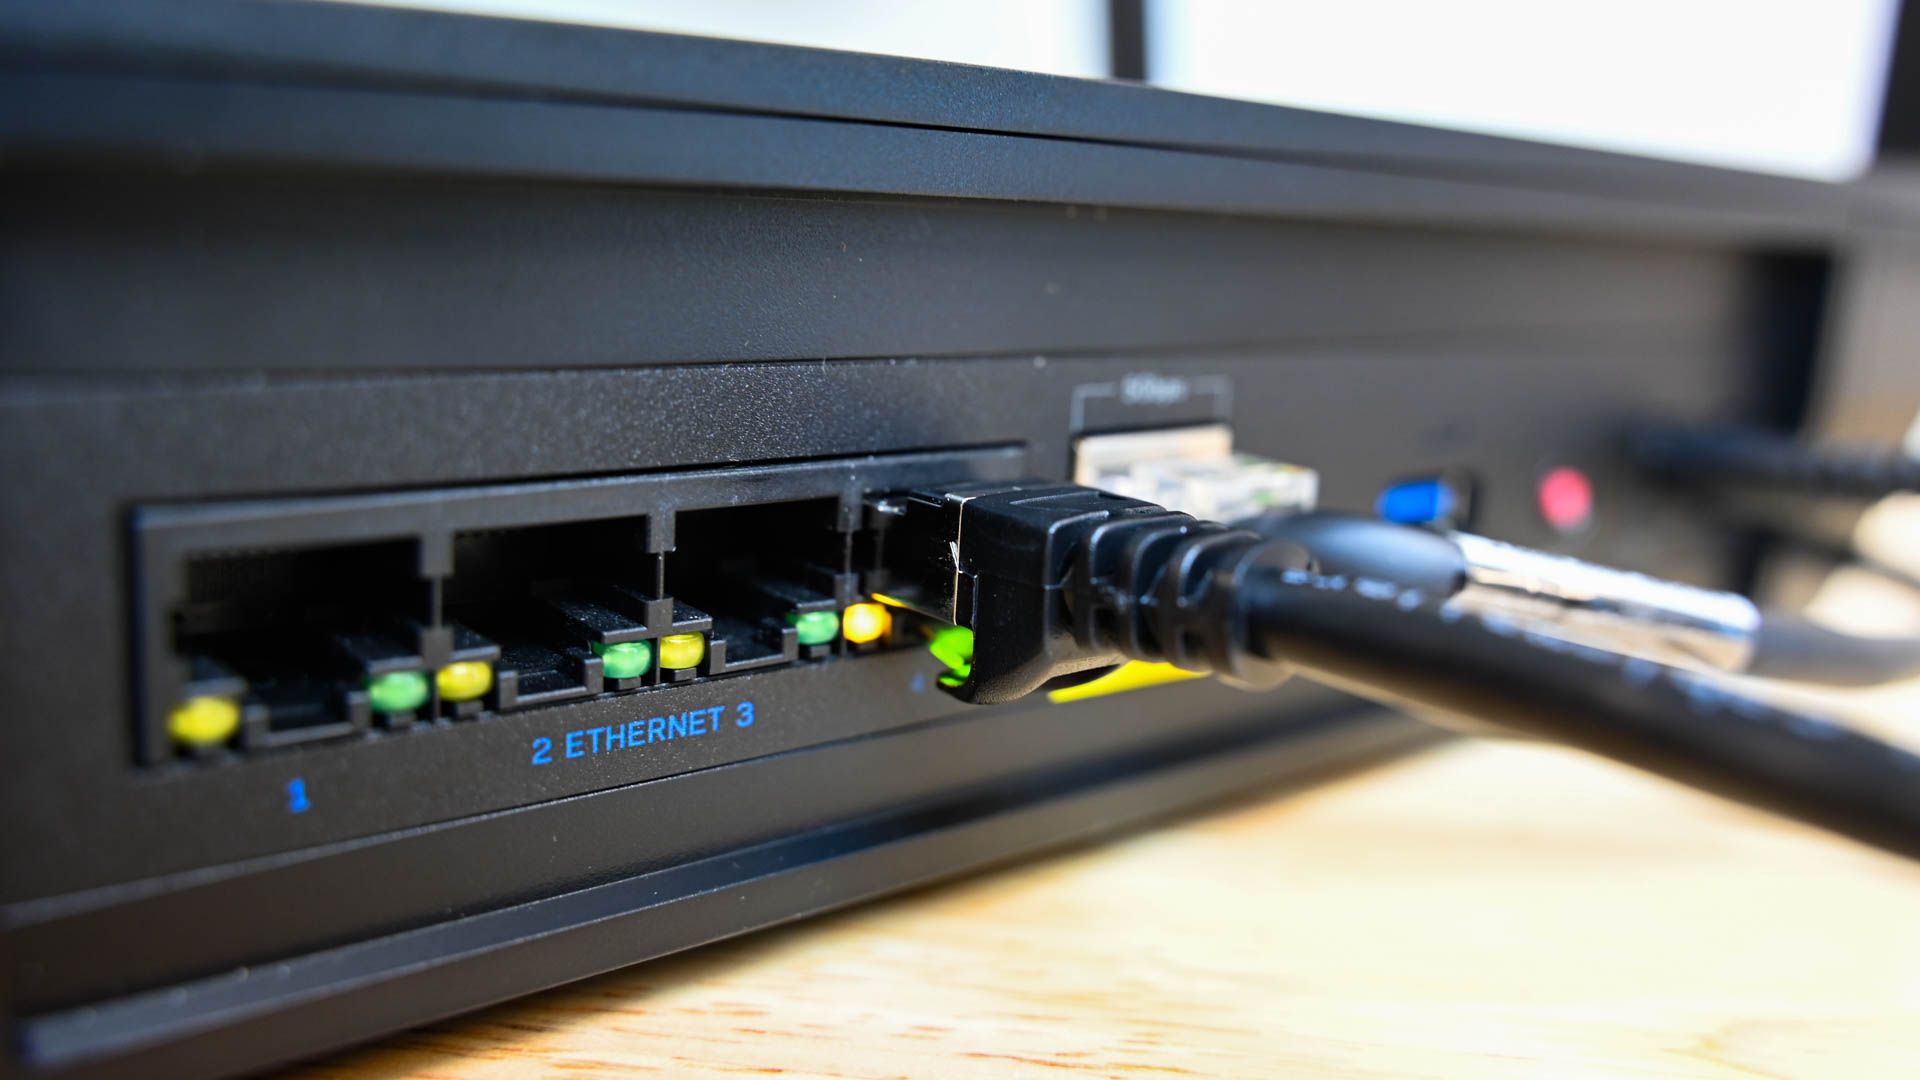 Ethernet cable plugged into an ethernet port on a router